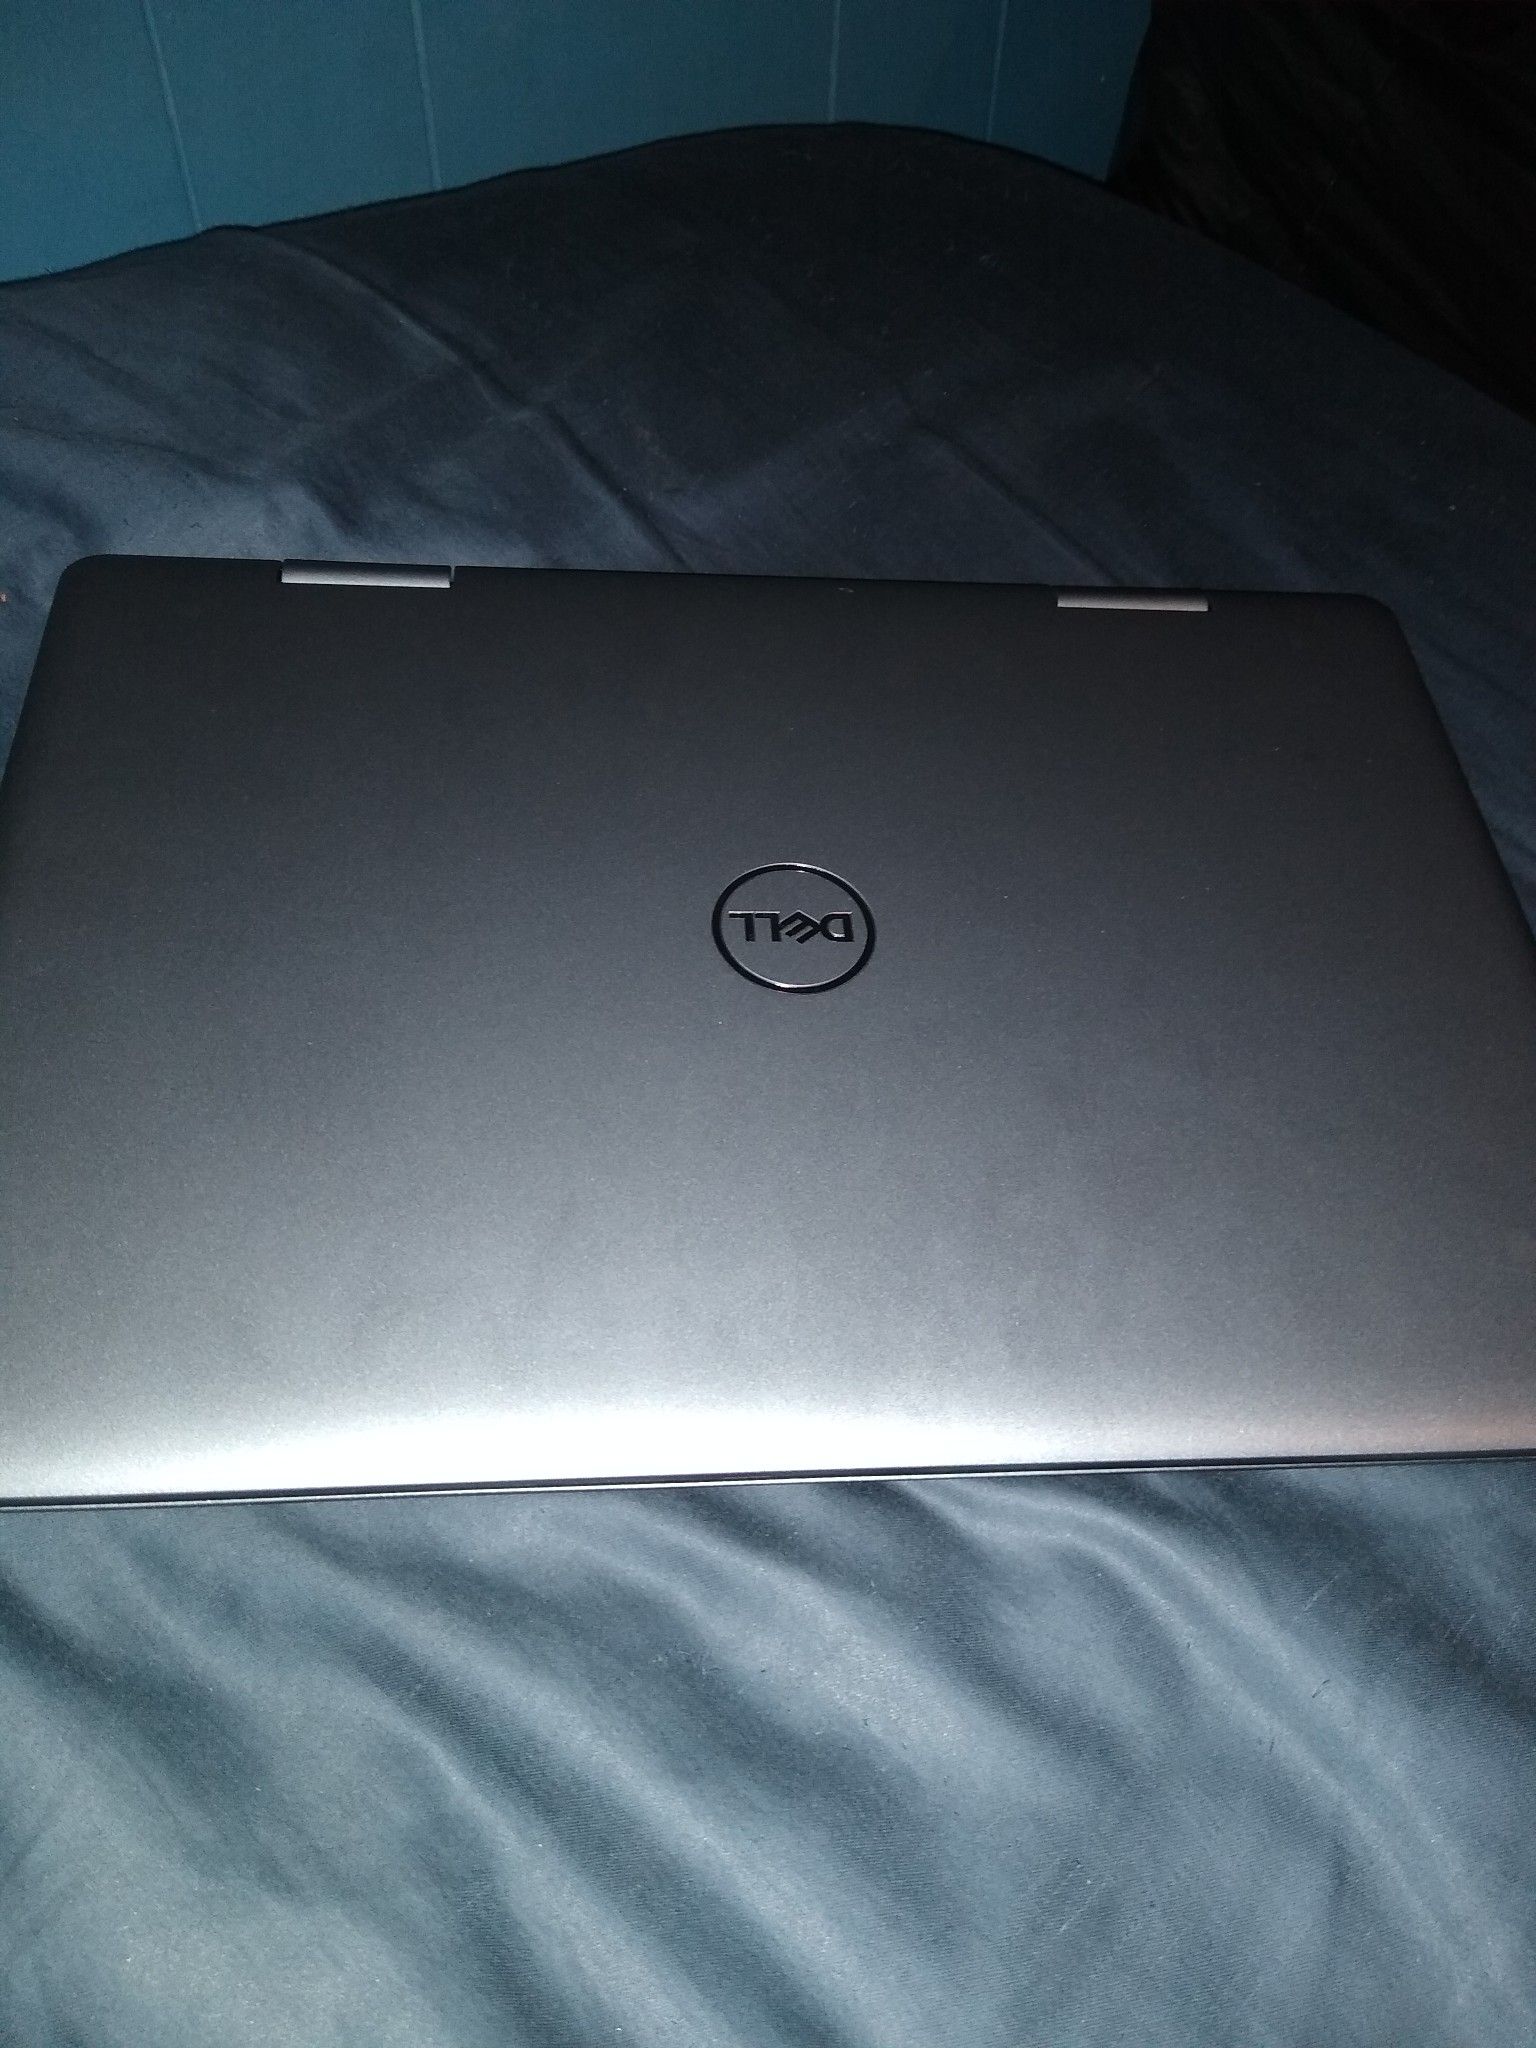 New Dell touch screen laptop